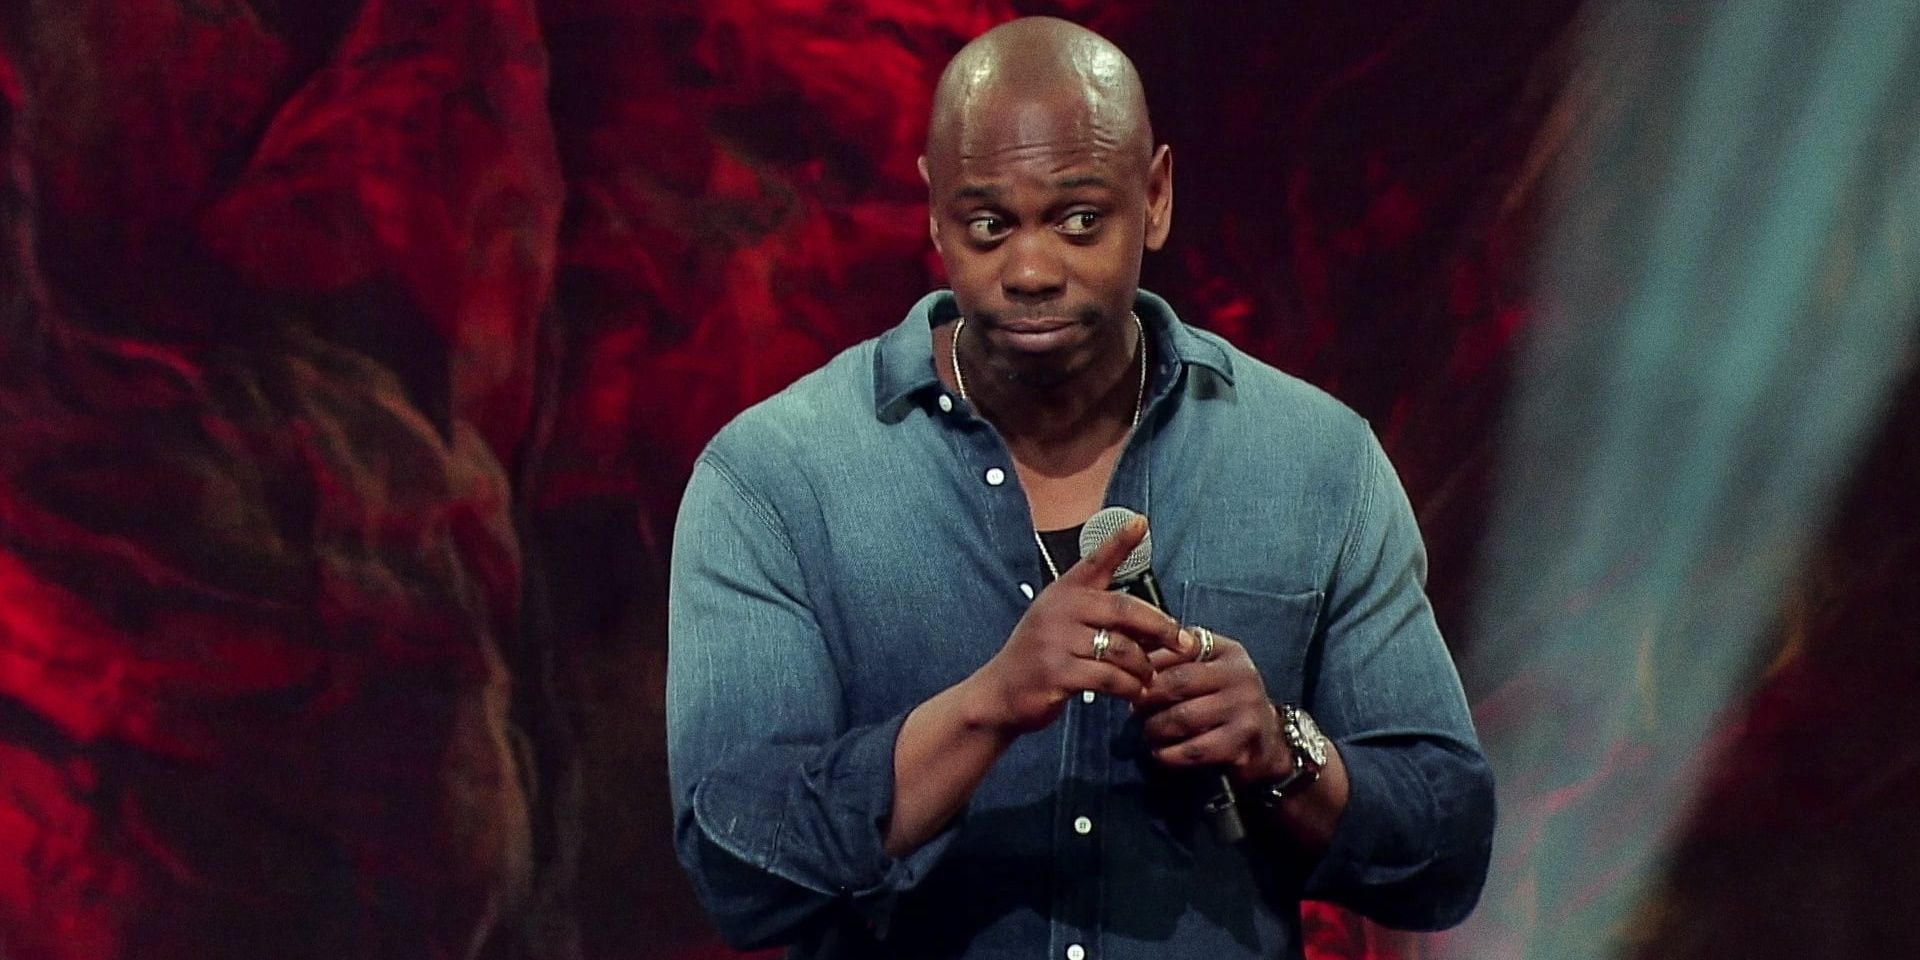 10 Best Dave Chappelle StandUp Performances Ranked (According To IMDb)